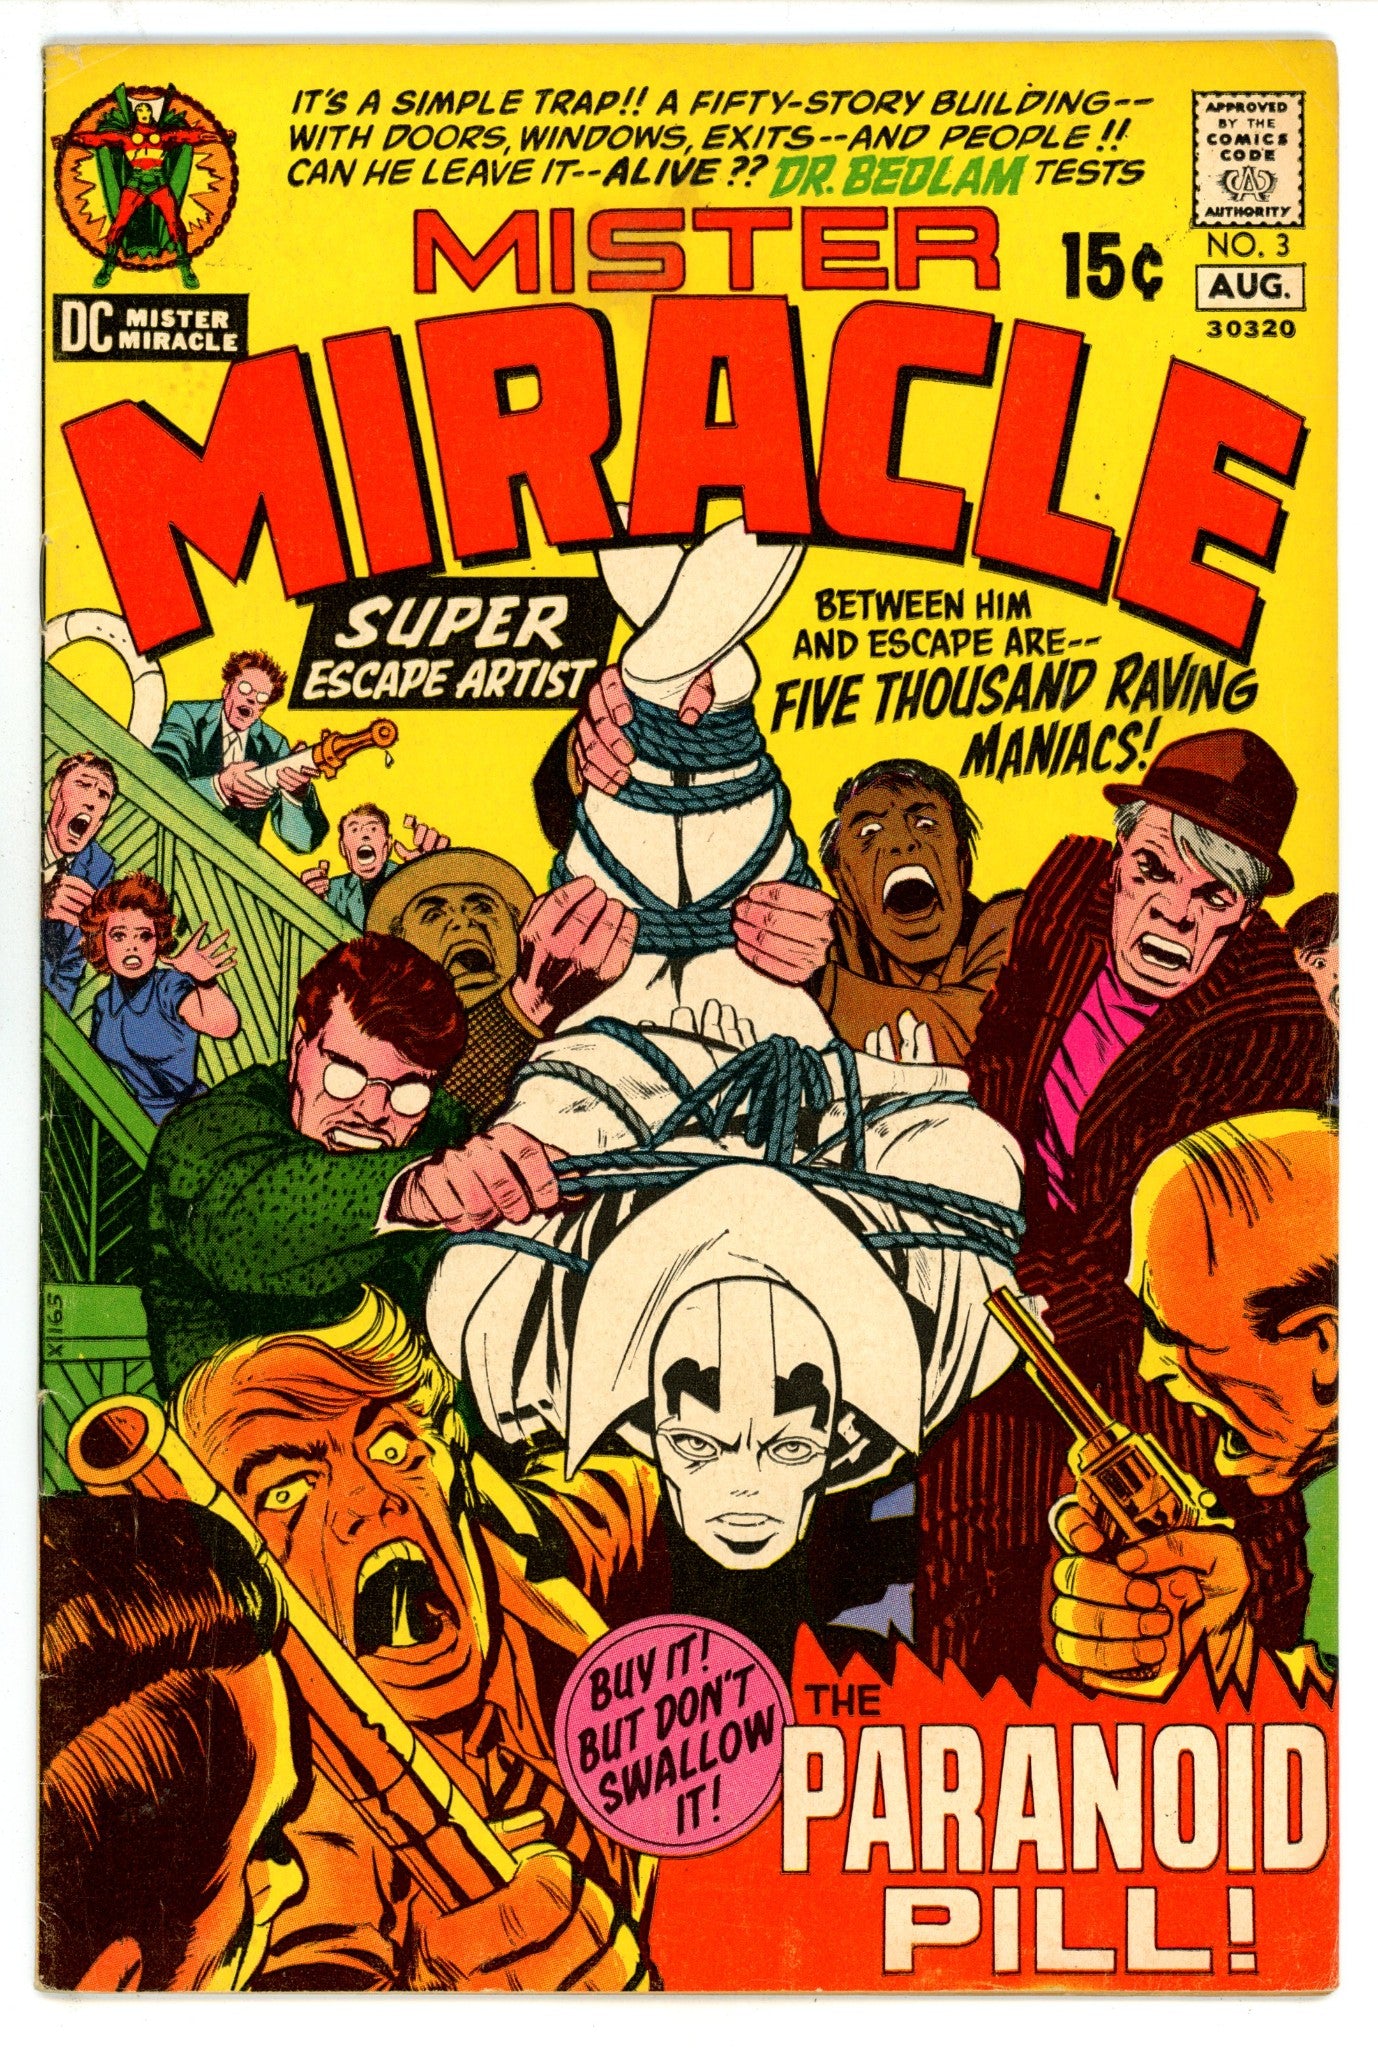 Mister Miracle Vol 1 3 VG+ (4.5) (1971) 